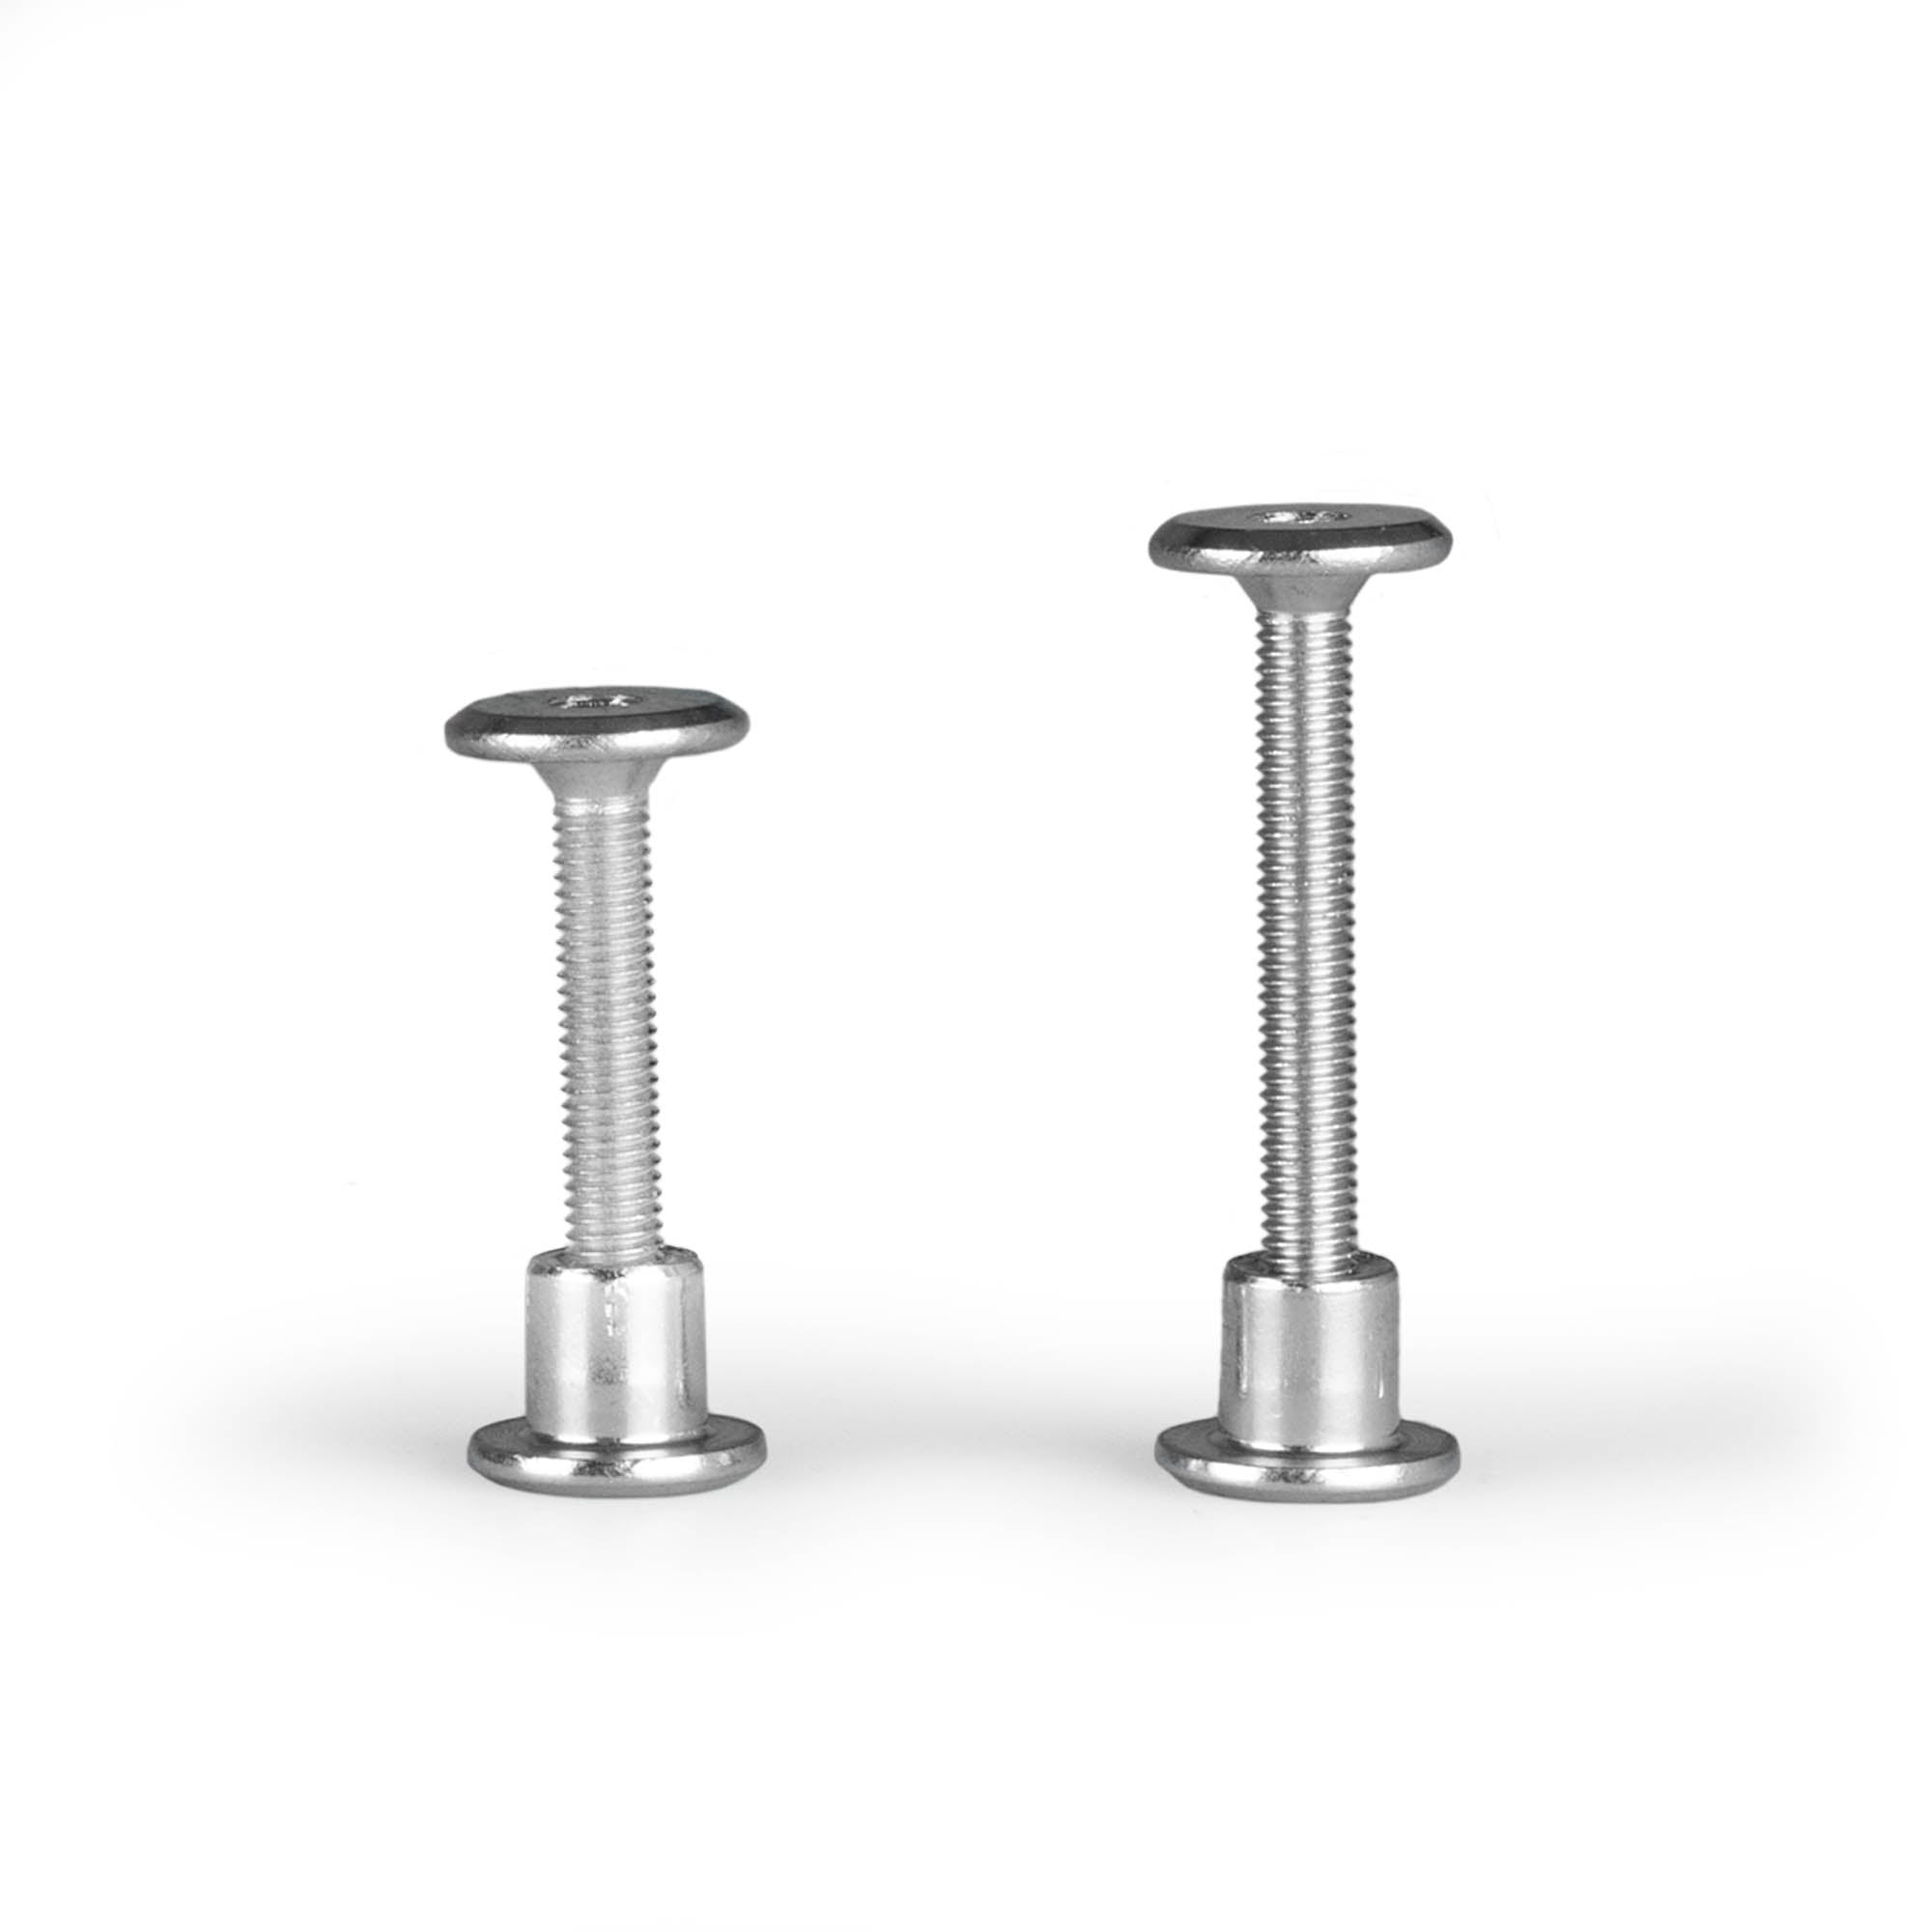 Comparison between small and large bolts